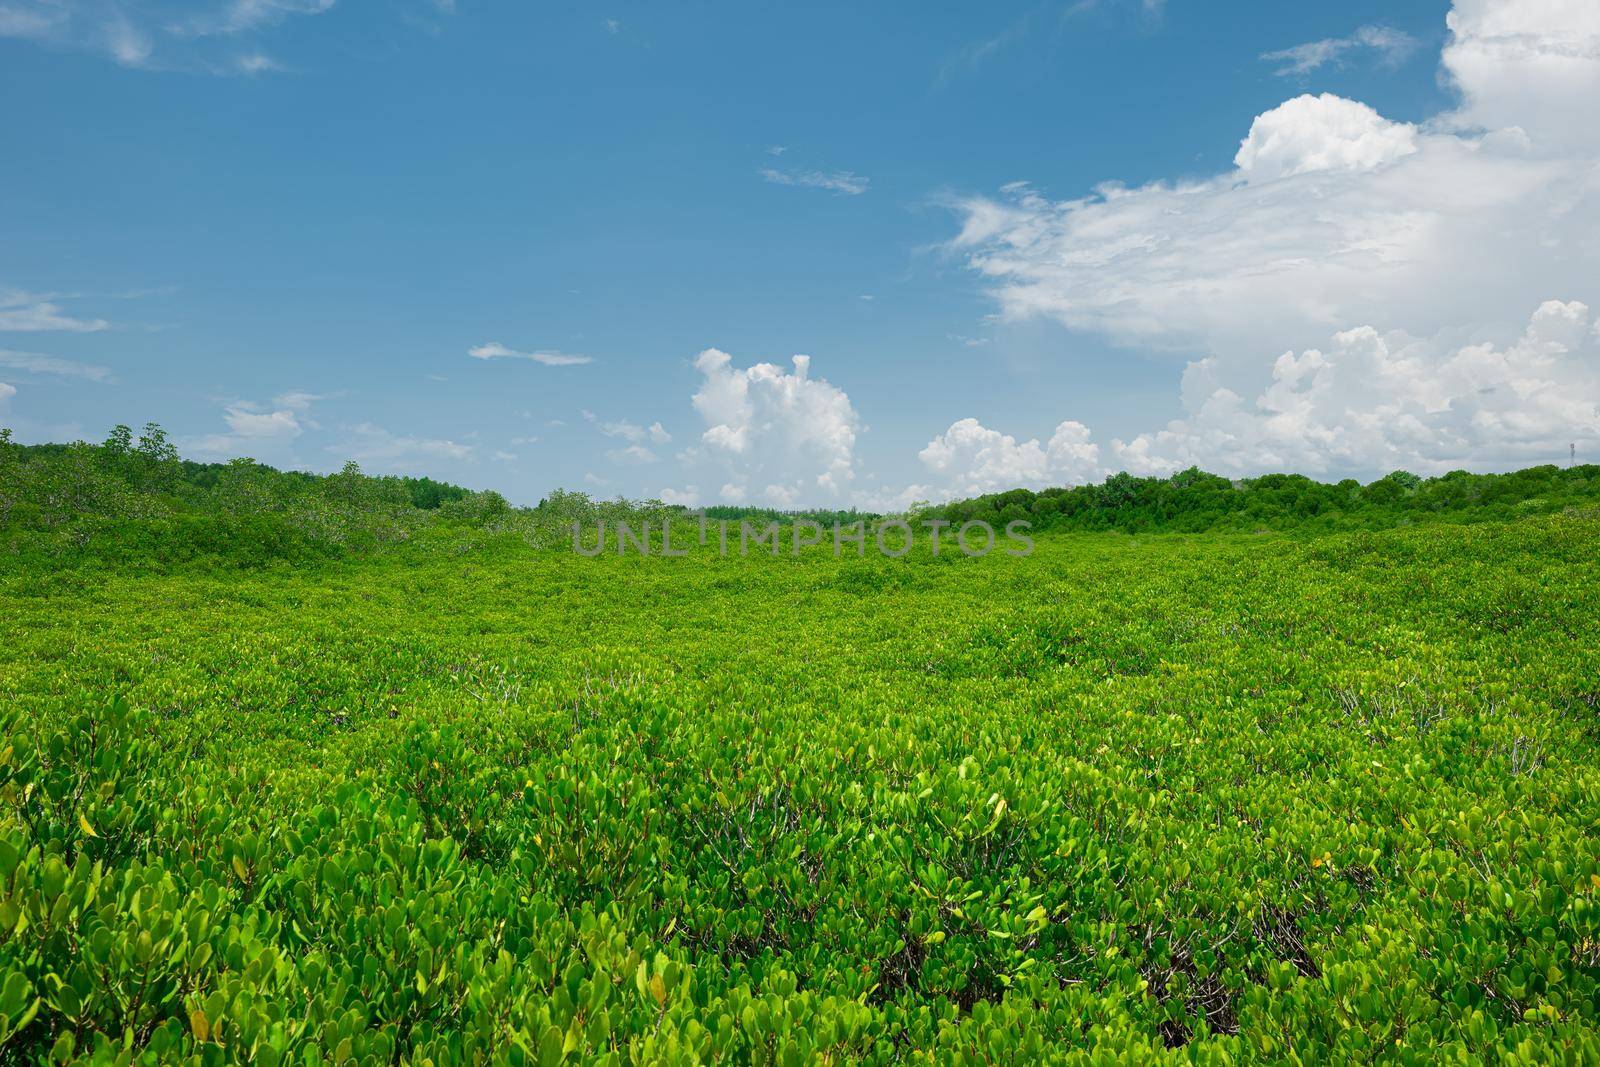 Group of tree background with sunny day blue sky white clouds, landscape nature green trees outdoor, ECO environment